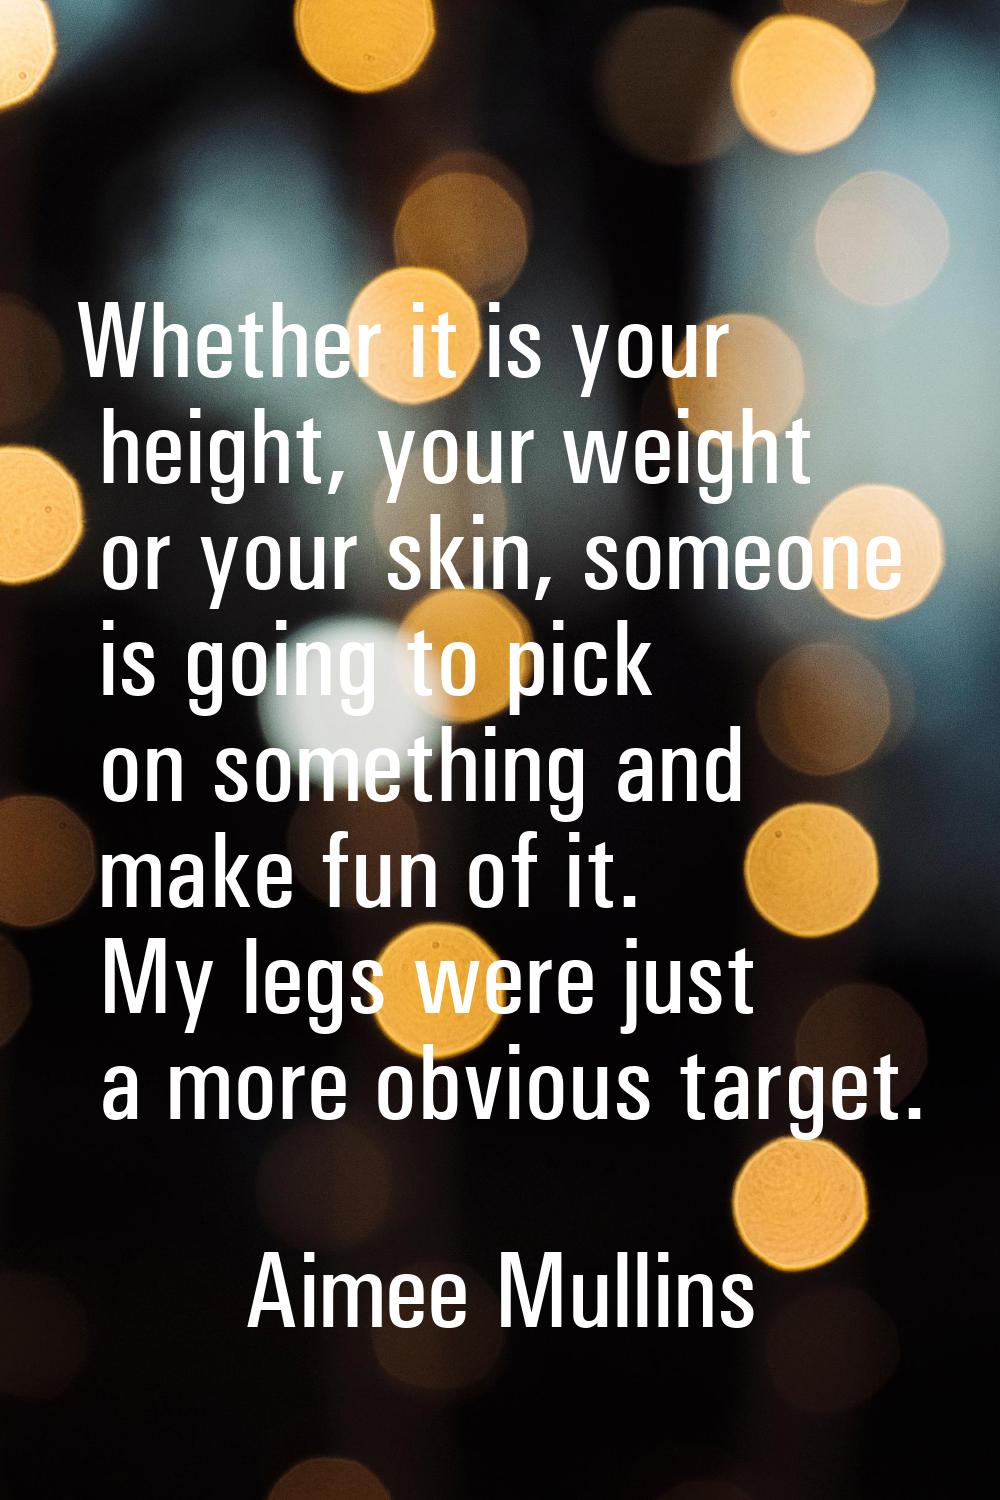 Whether it is your height, your weight or your skin, someone is going to pick on something and make